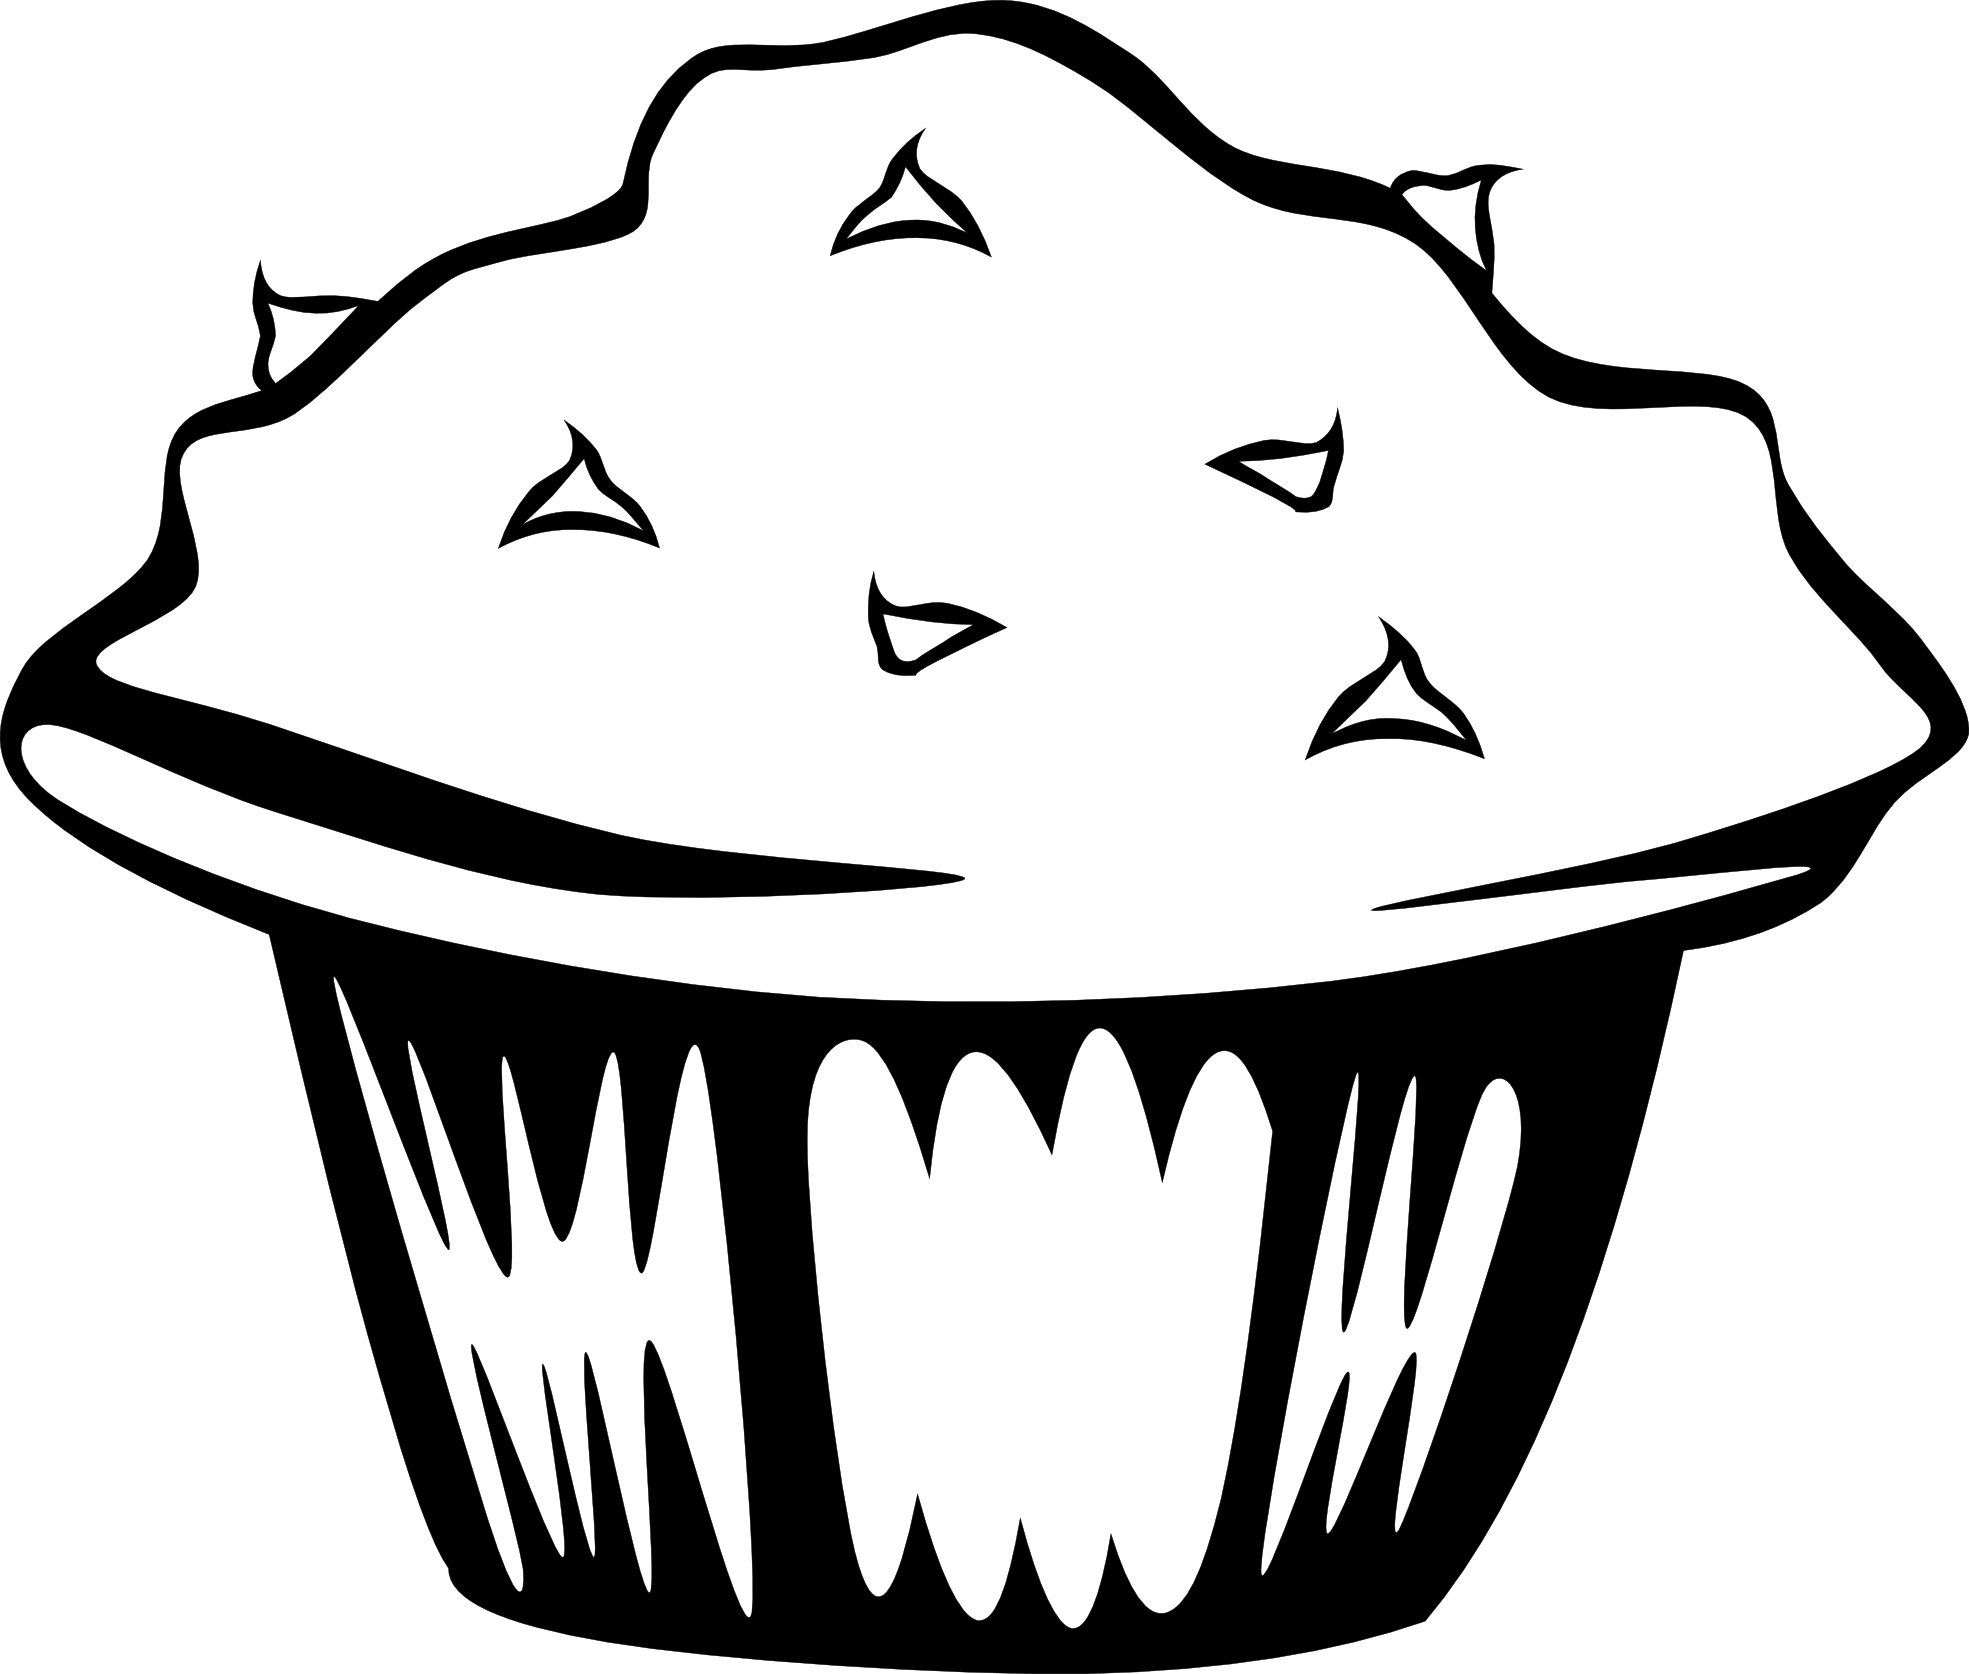 muffin-clipart-black-and-white-clip-art-library